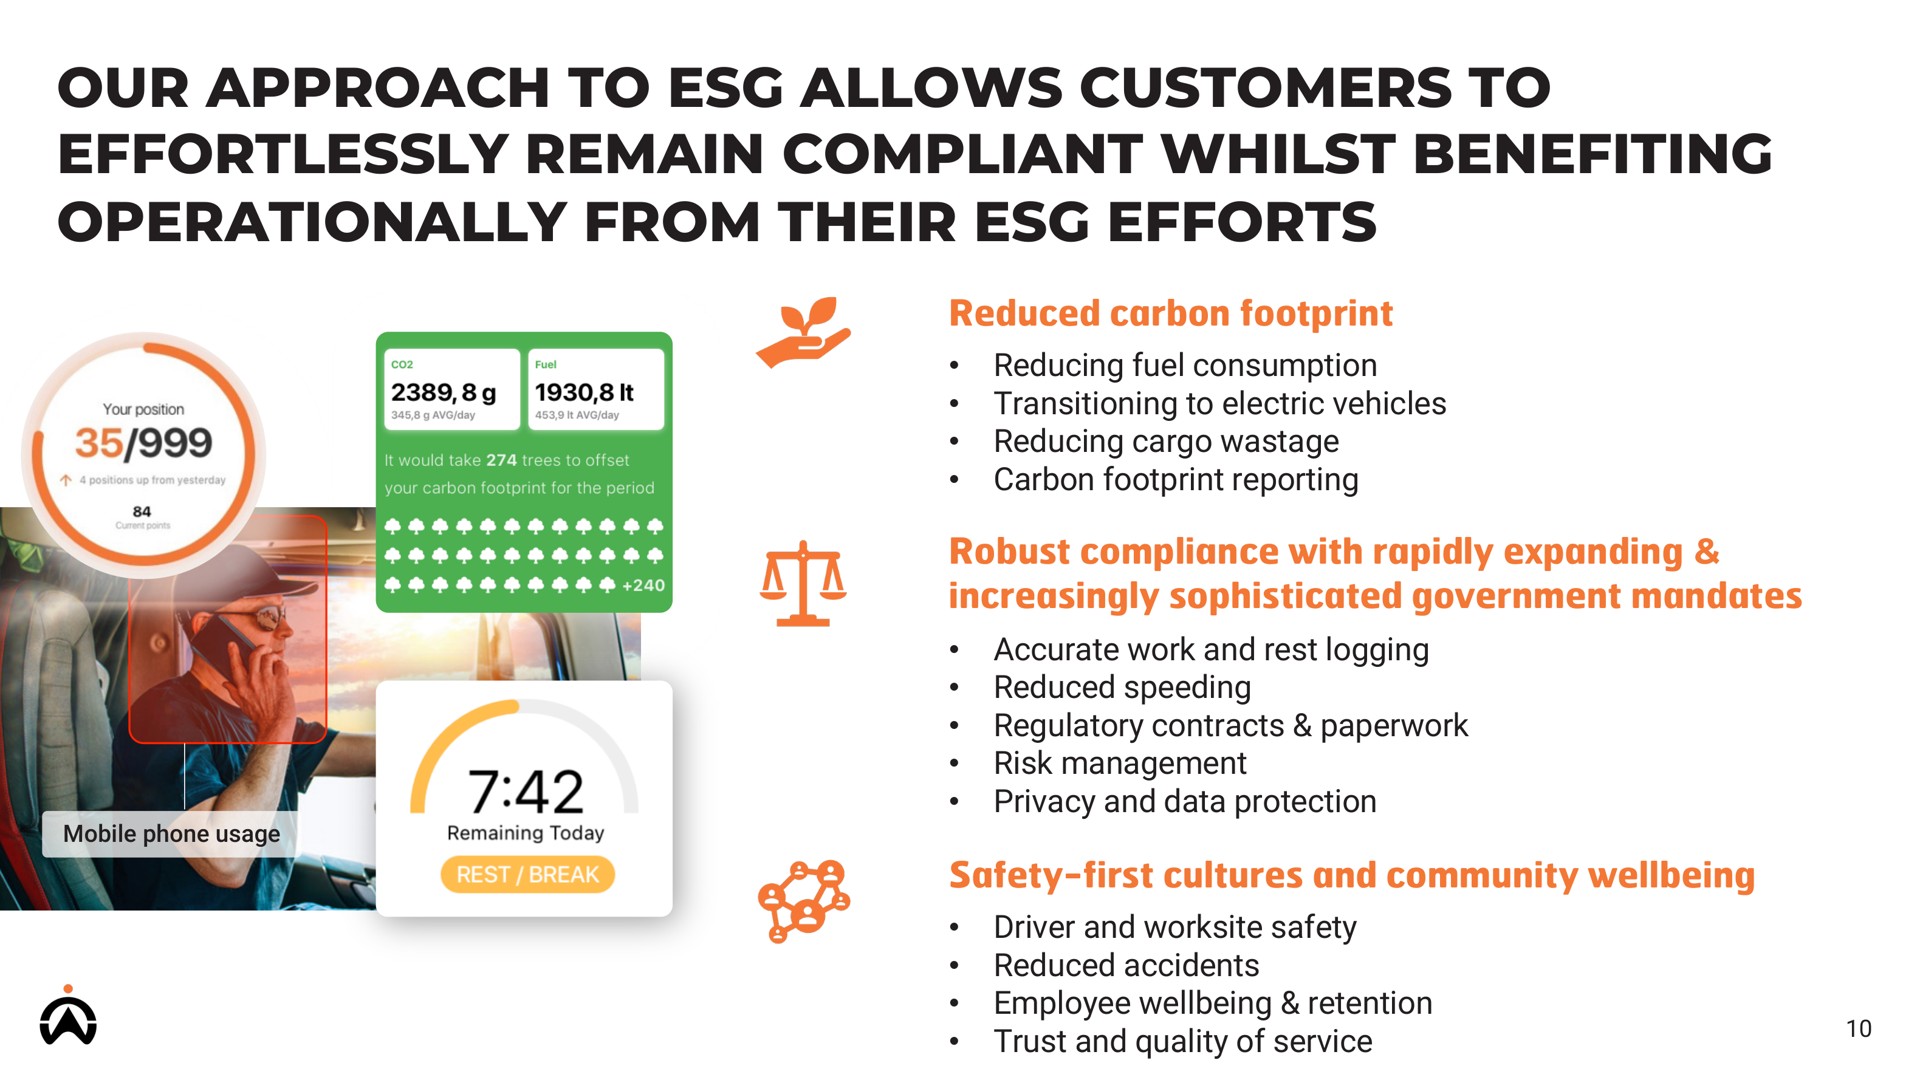 our approach to allows customers to effortlessly remain compliant whilst benefiting from their efforts | Karooooo